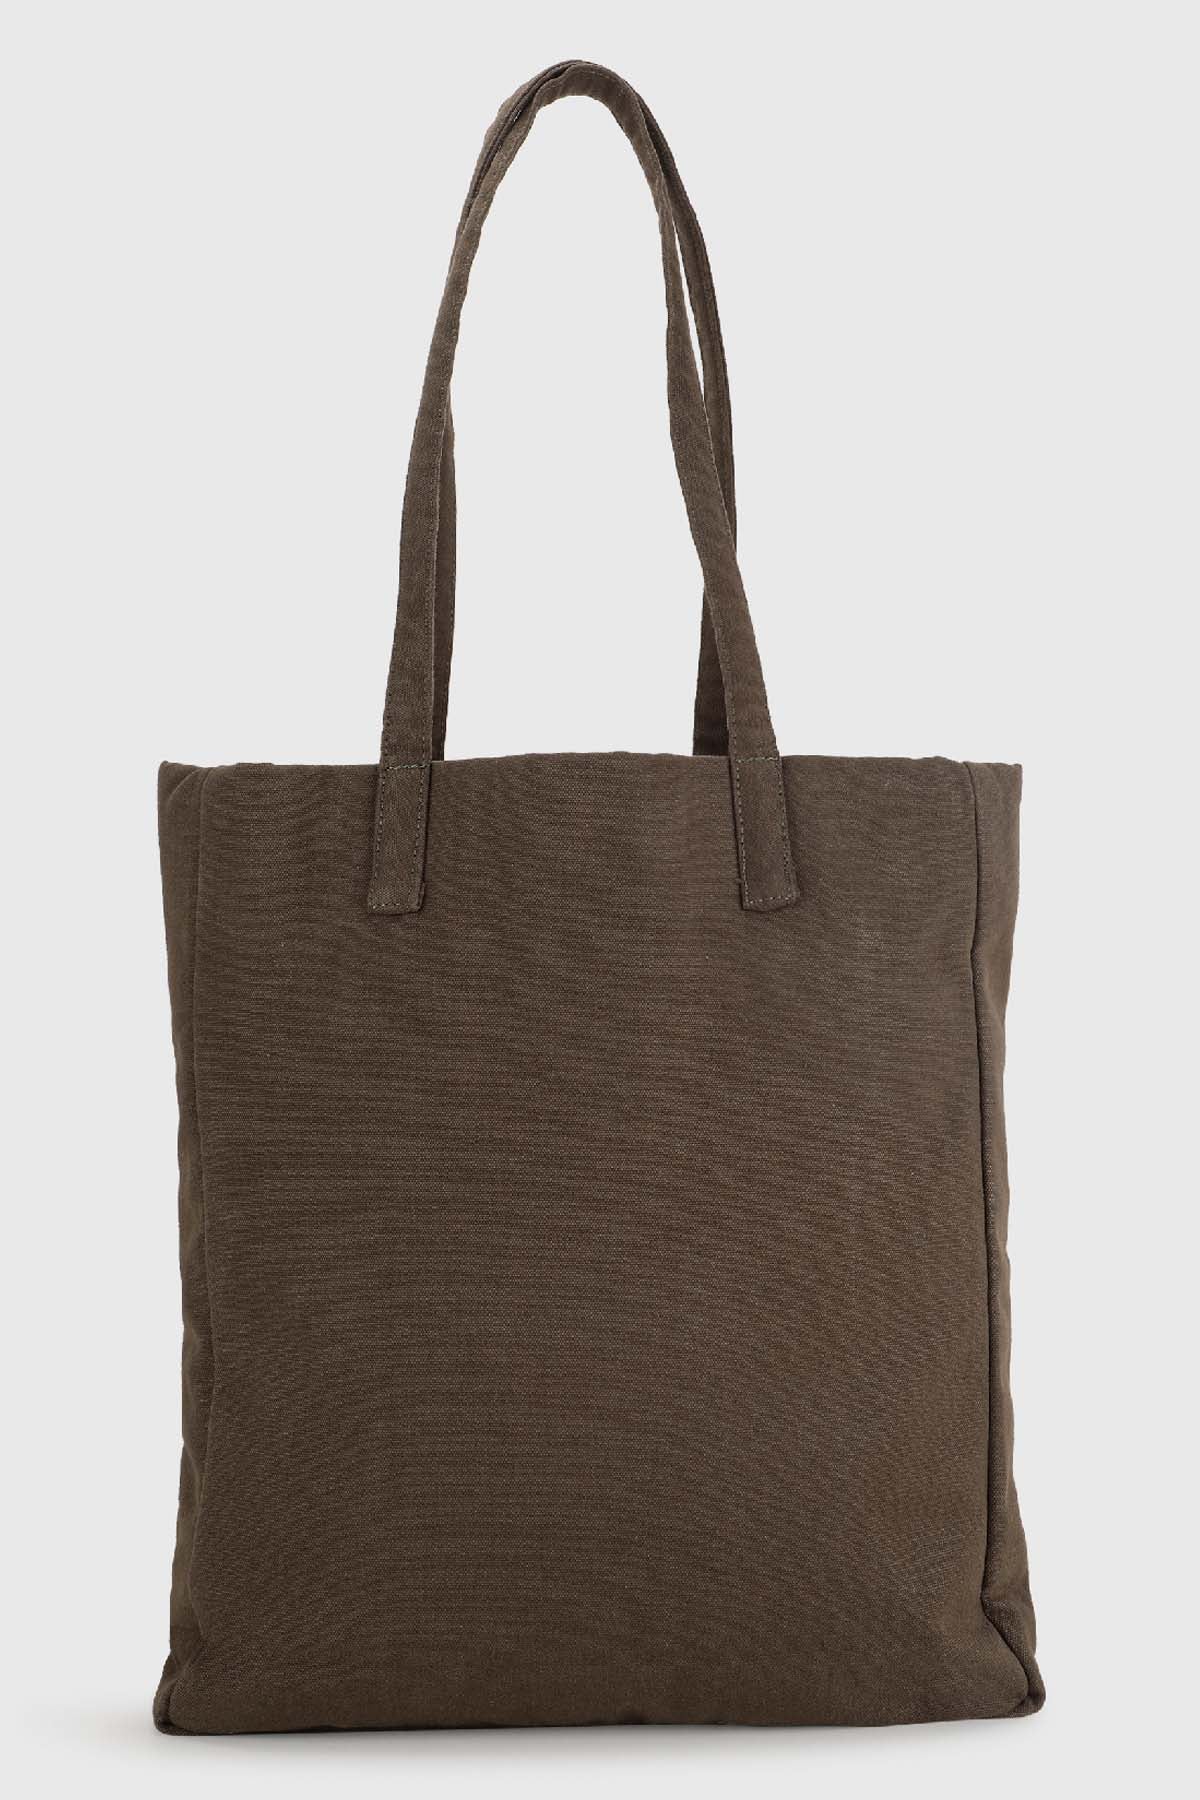 Olive Embroidered Tote Bag